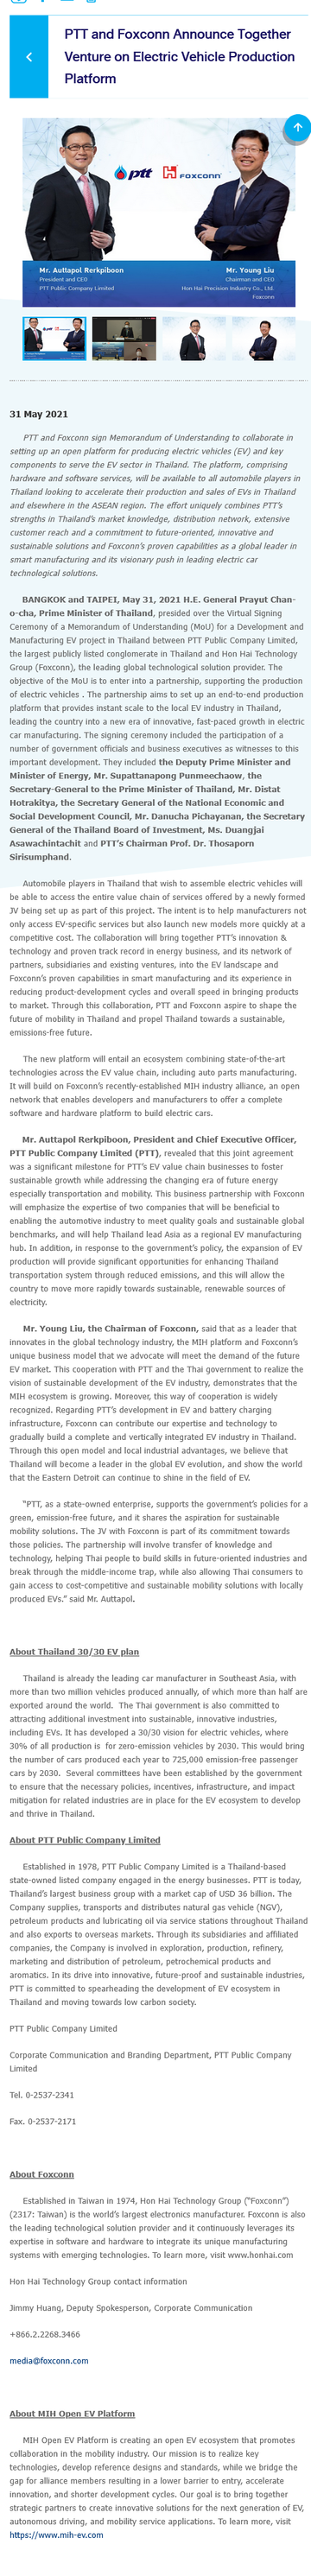 PTT and Foxconn